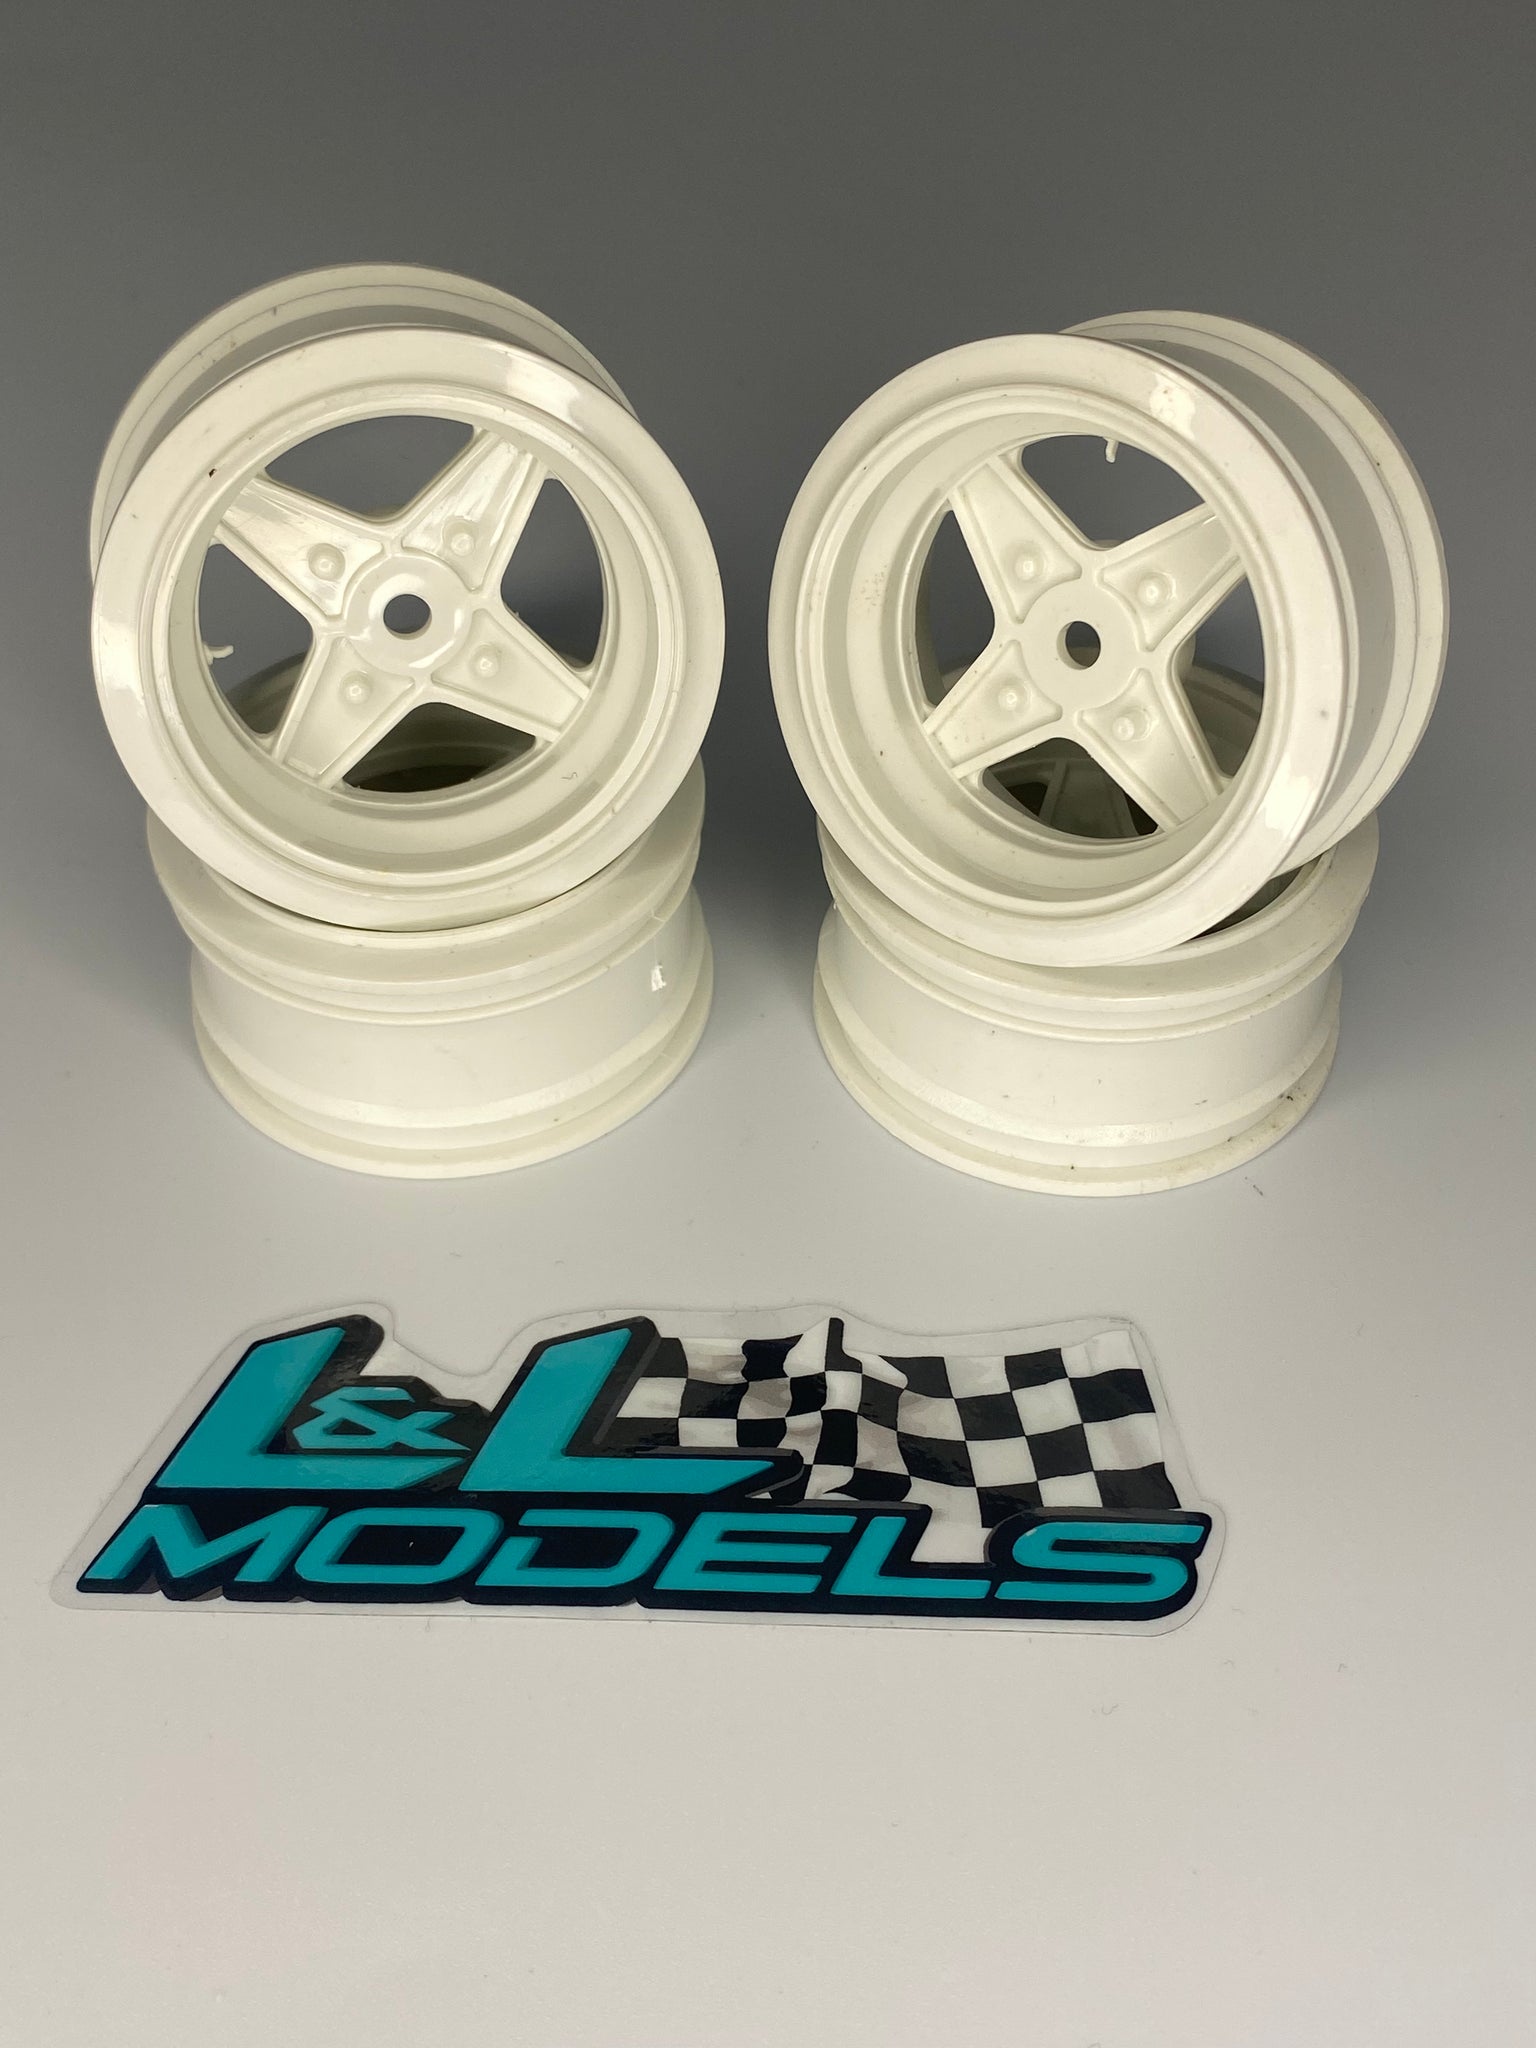 4 Spoke Ford Rs2000 White 6mm offset 26mm Rc Touring Car Wheels For Tamiya TT01 TT02 HPI Kyosho 12mm Hex Not M Chassis lg055w